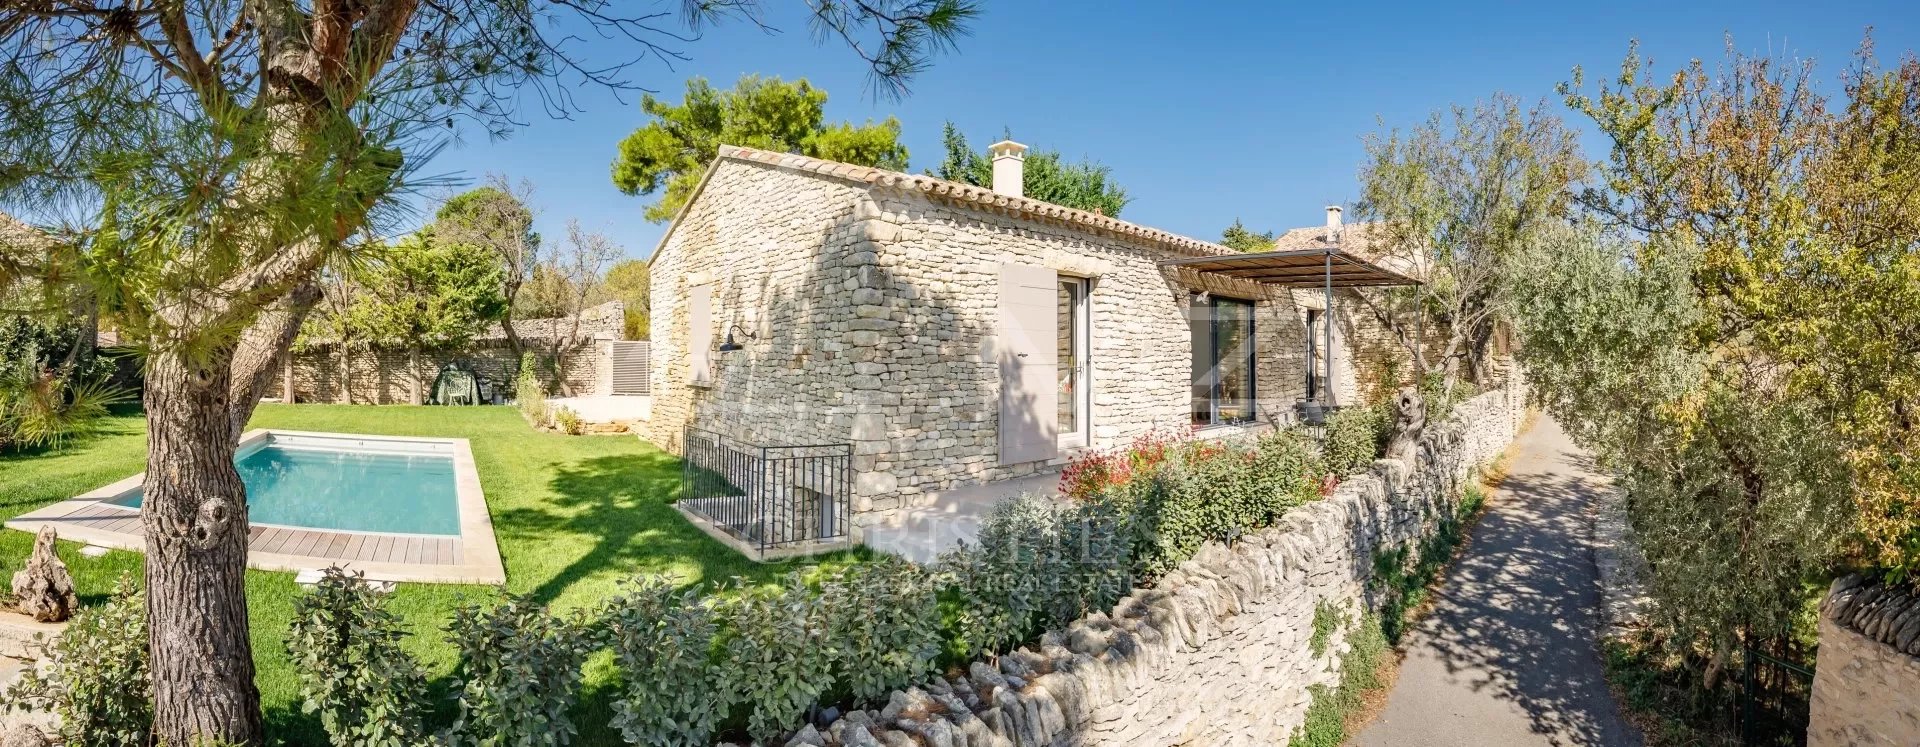 Gordes center - Beautiful refined house with pool